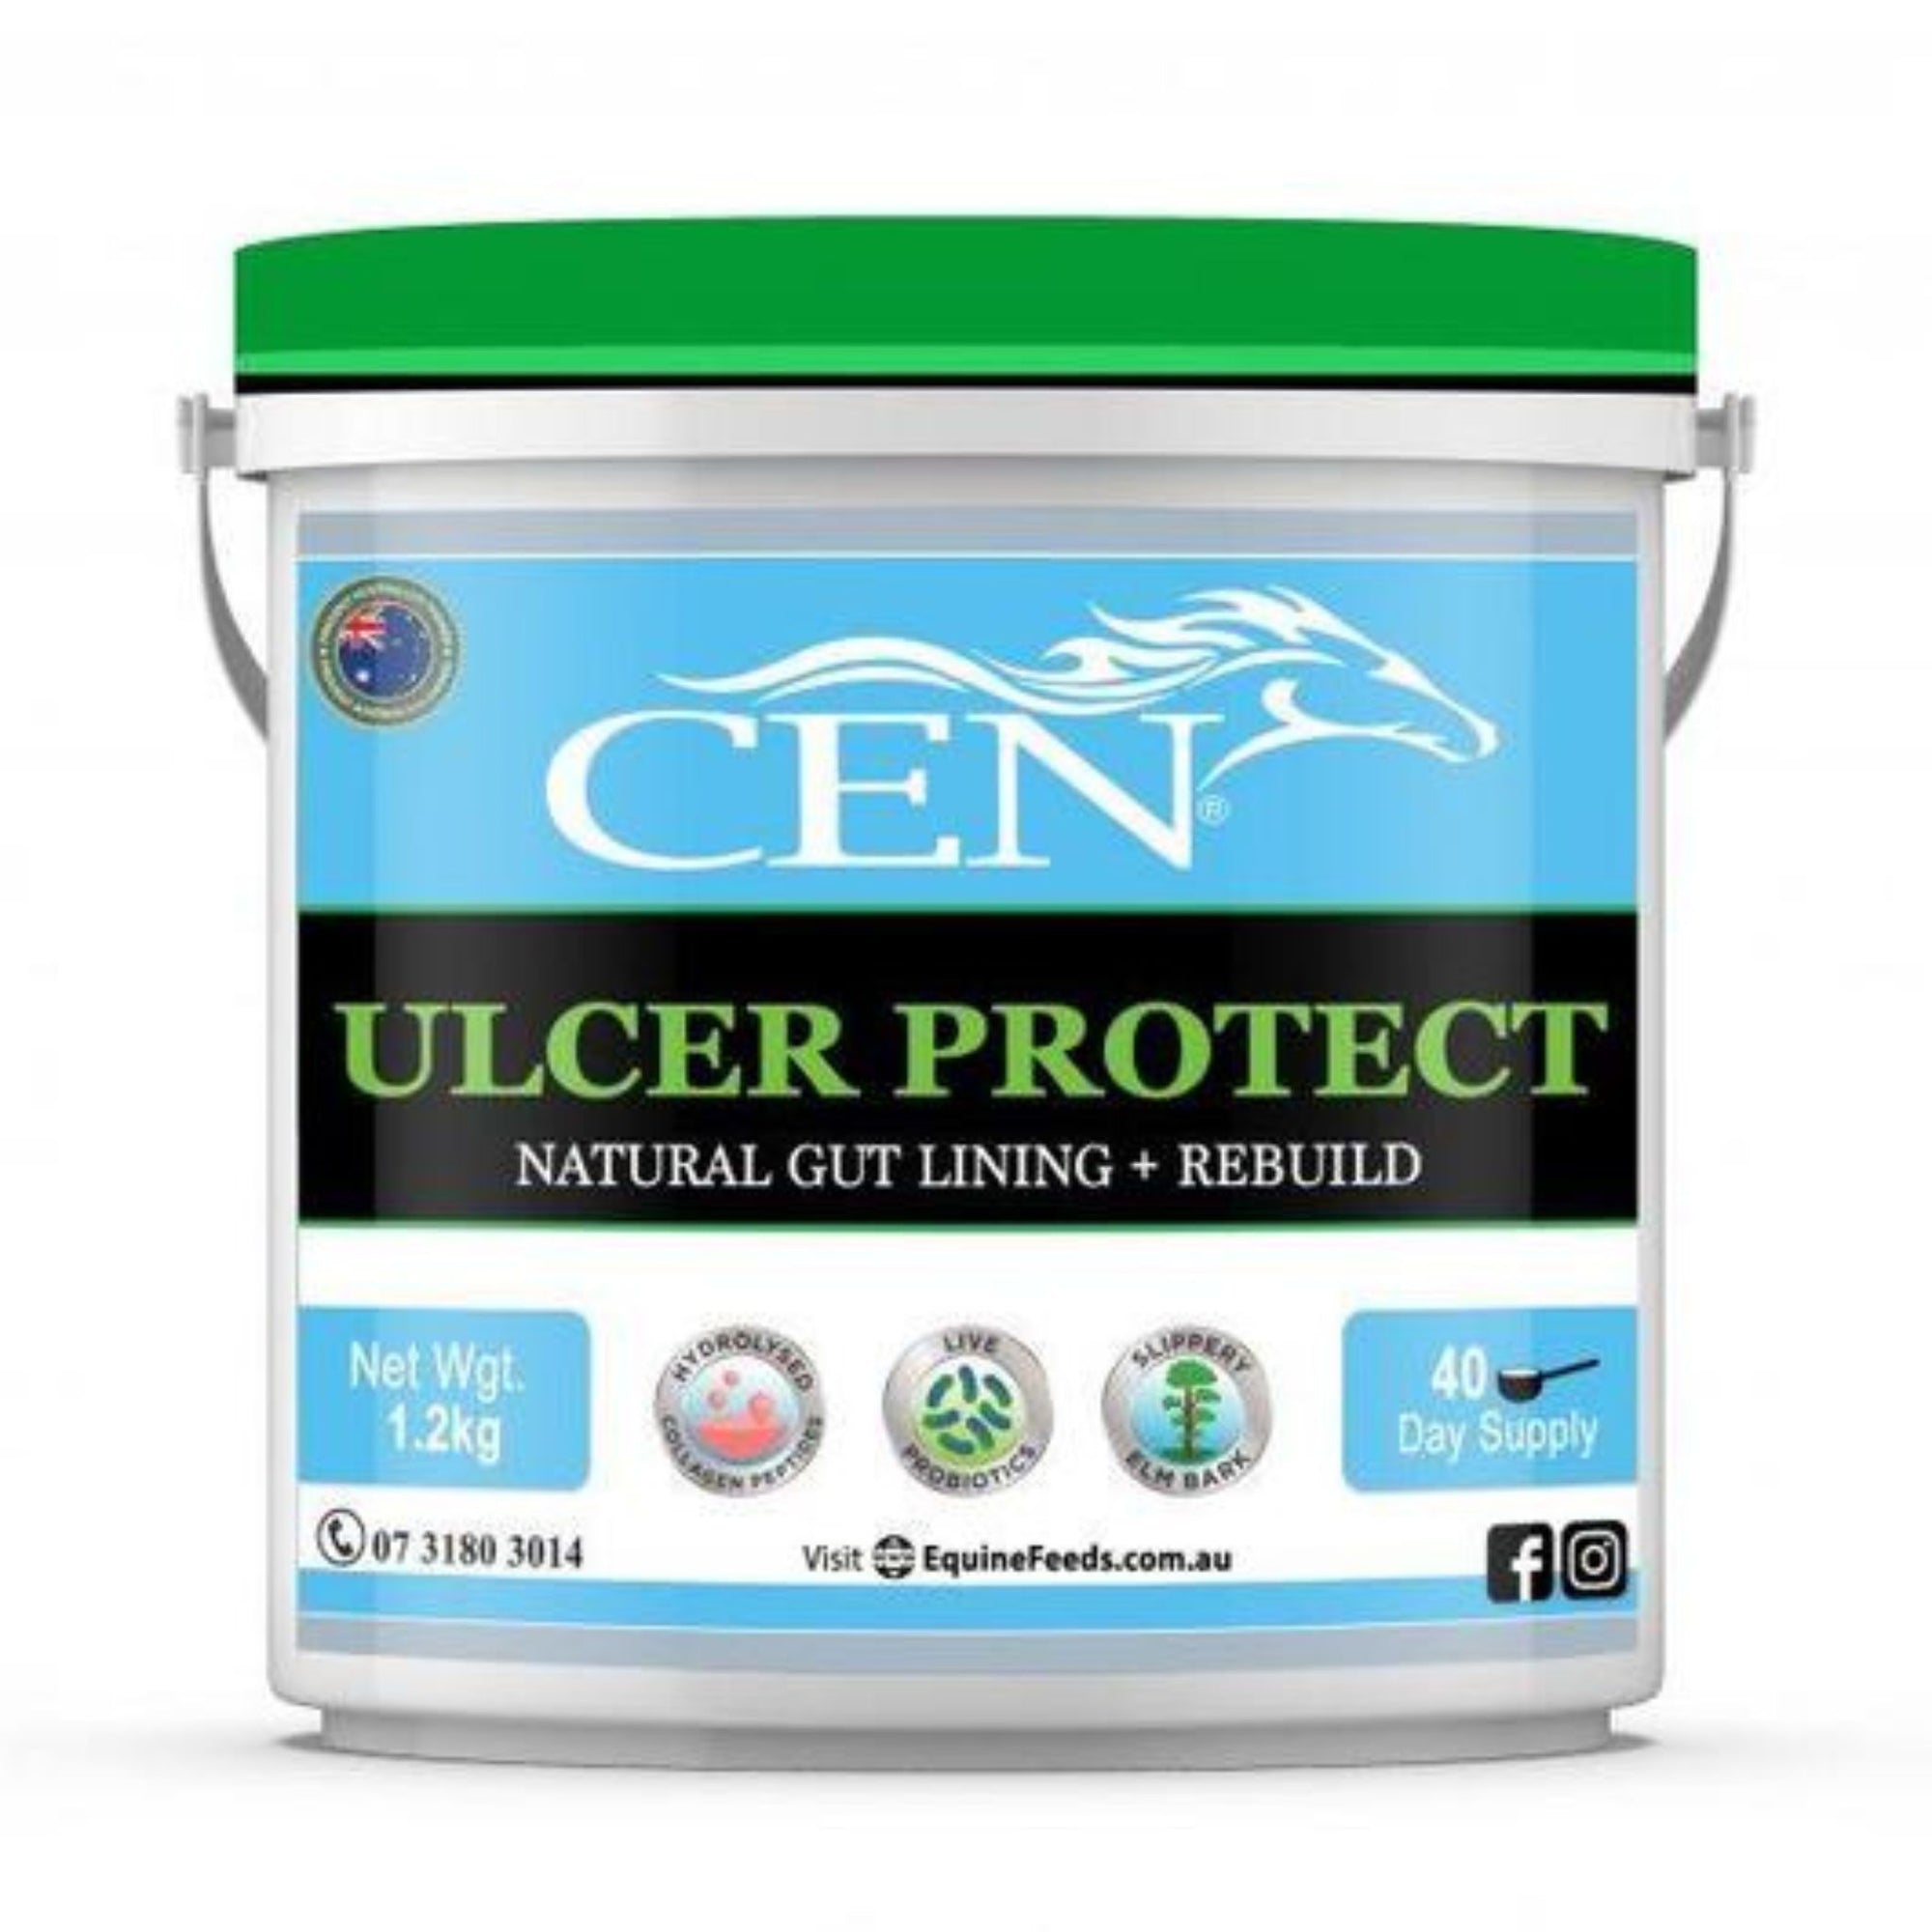 Illustration of CEN Ulcer Protect bucket with handle and green lid.